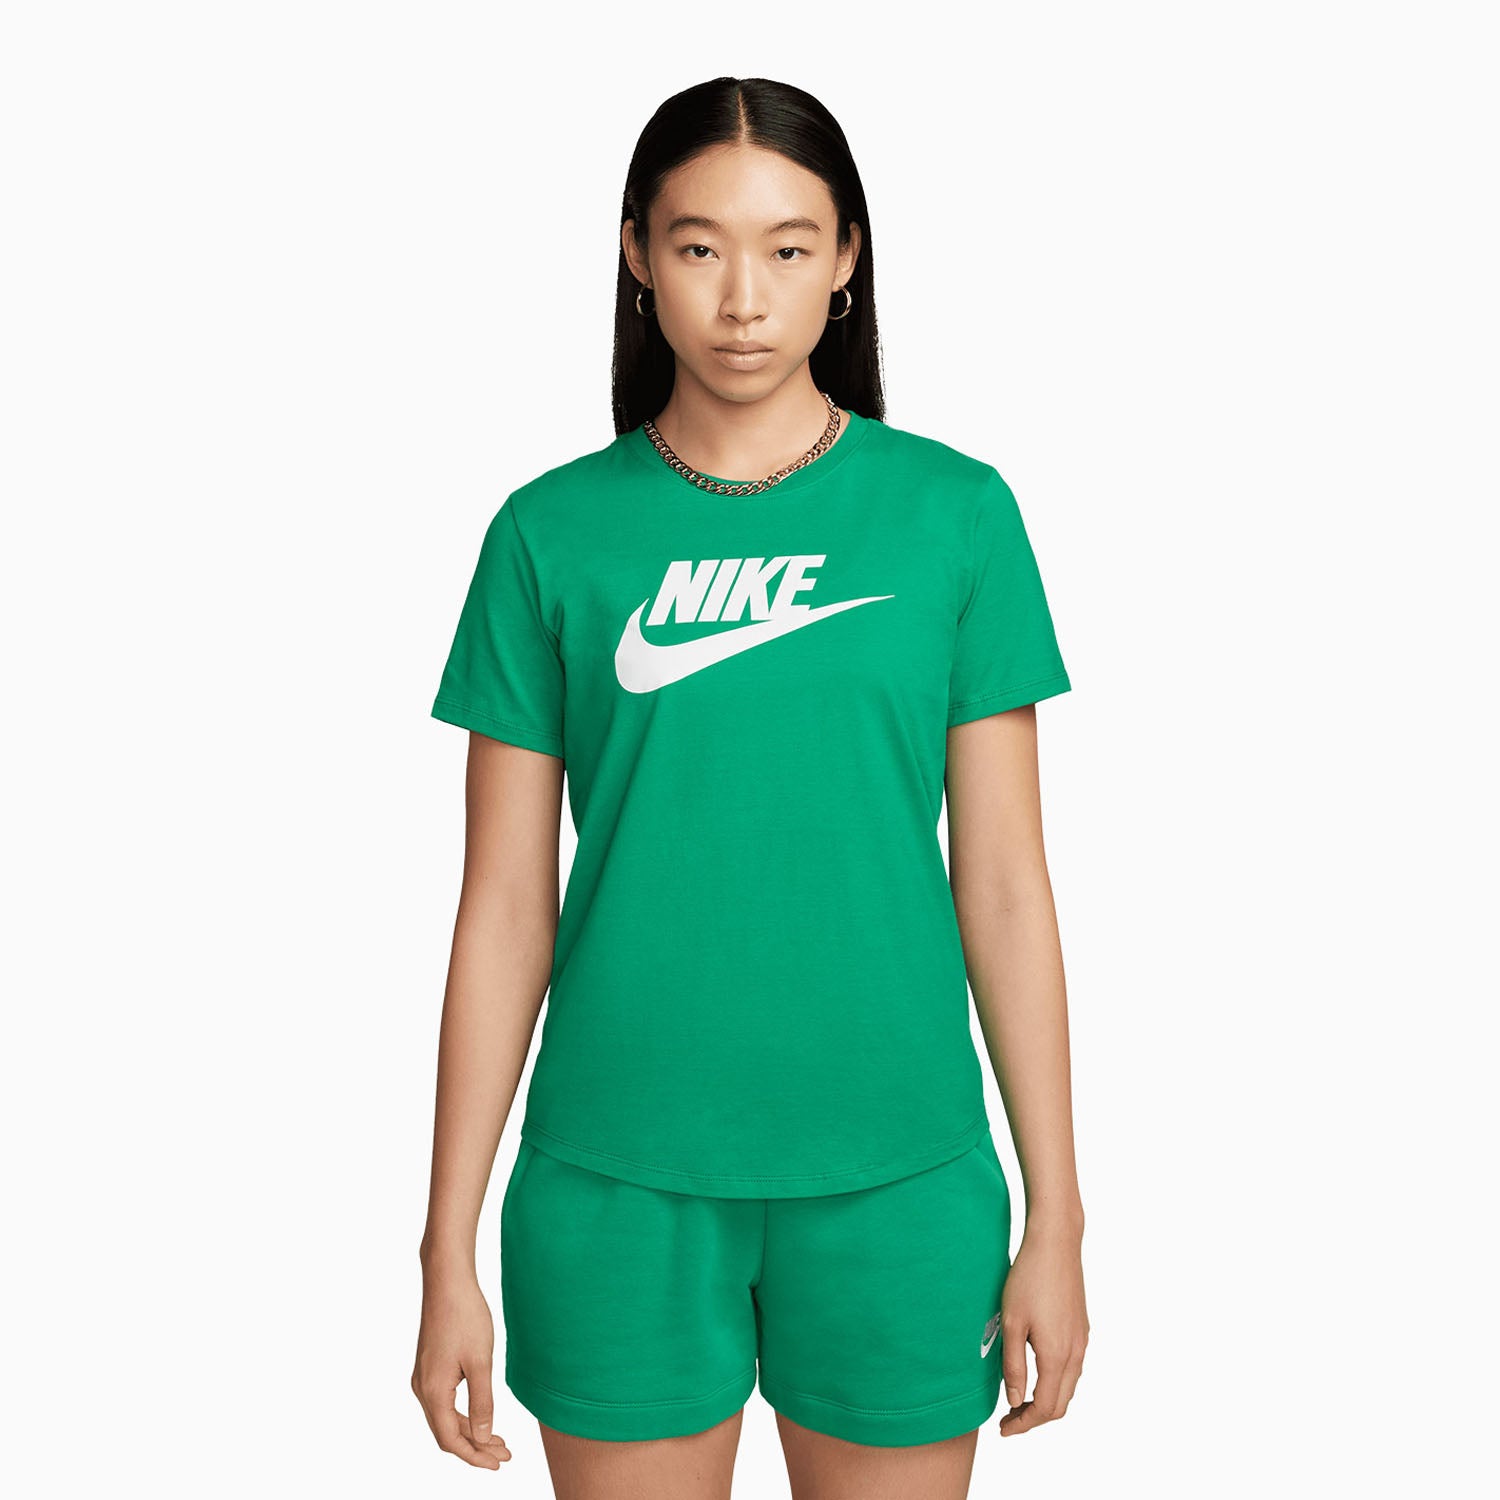 nike-womens-sportswear-essentials-outfit-dx7906-324-dq5802-324